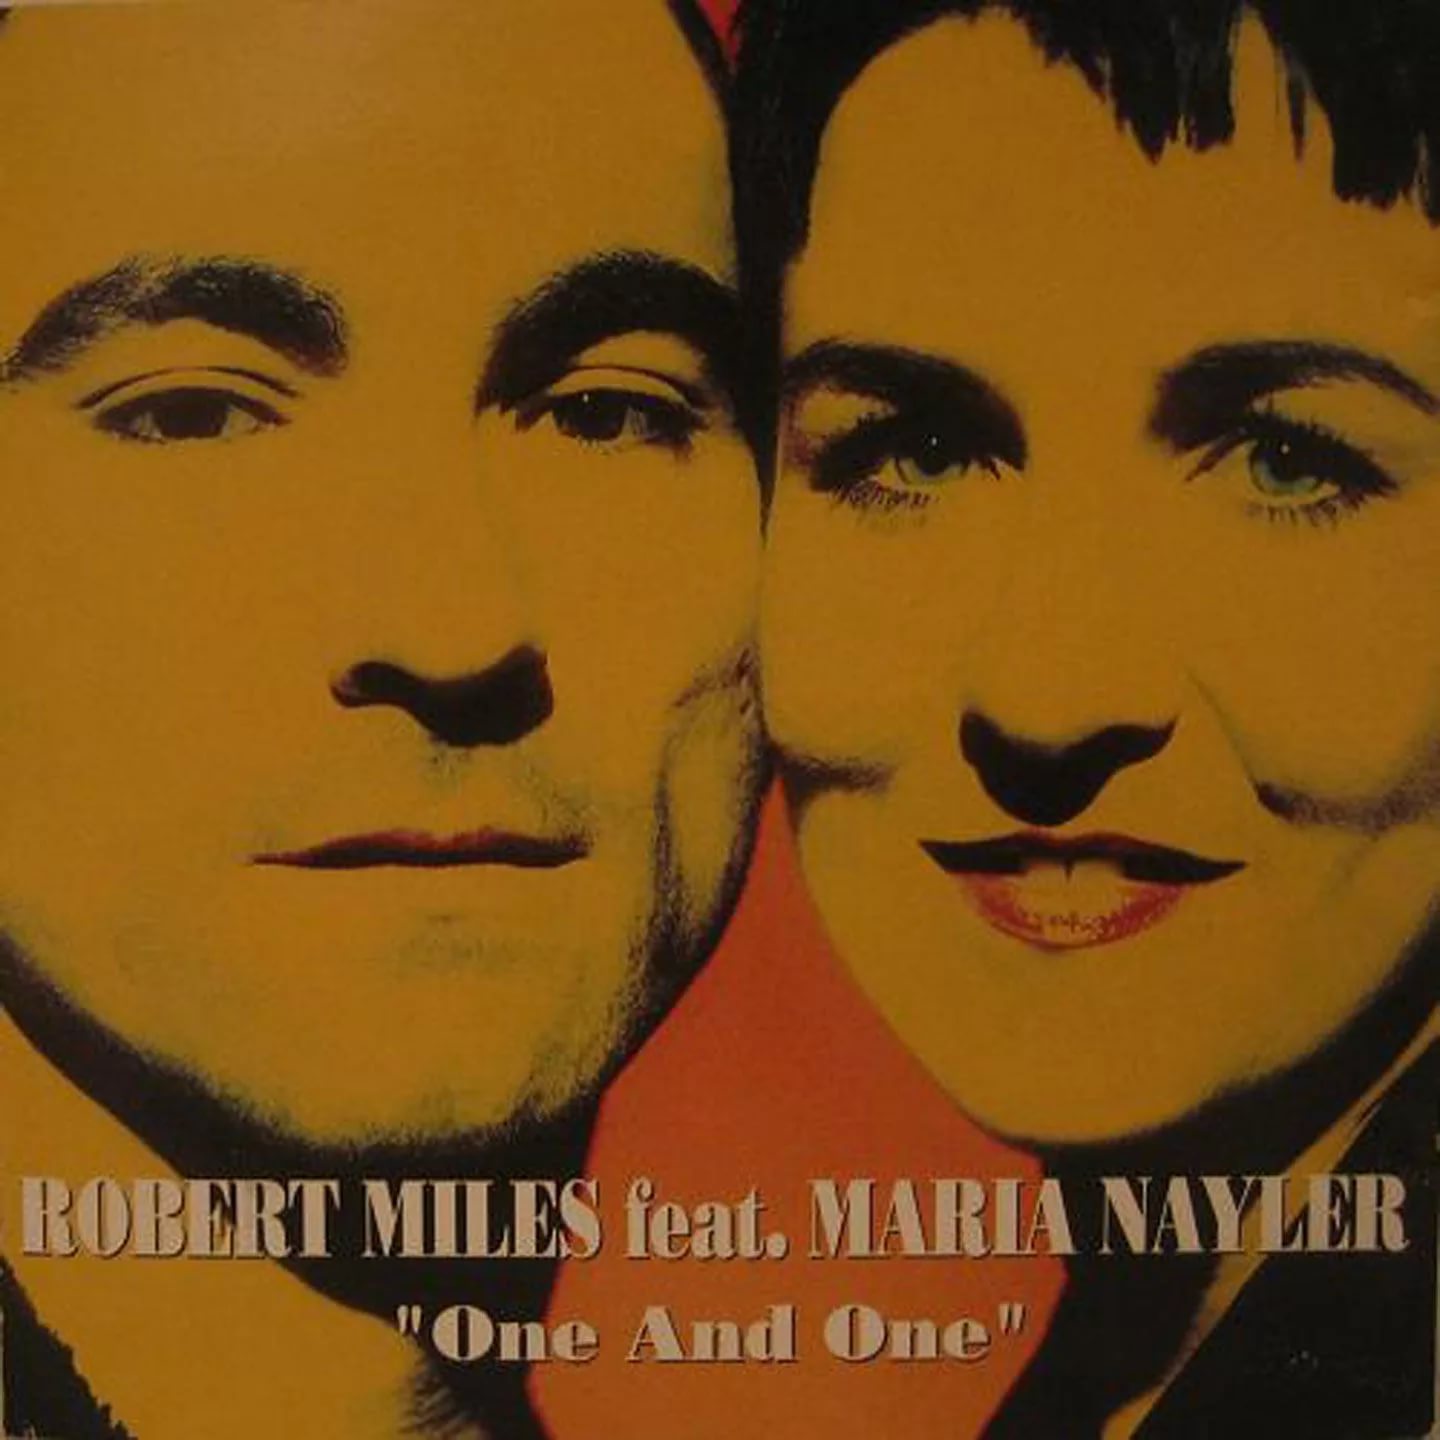 Miles maria. Robert Miles one and one. Maria Nayler one and one. And one обложки альбомов. Robert Miles - one & one обложки альбомов.